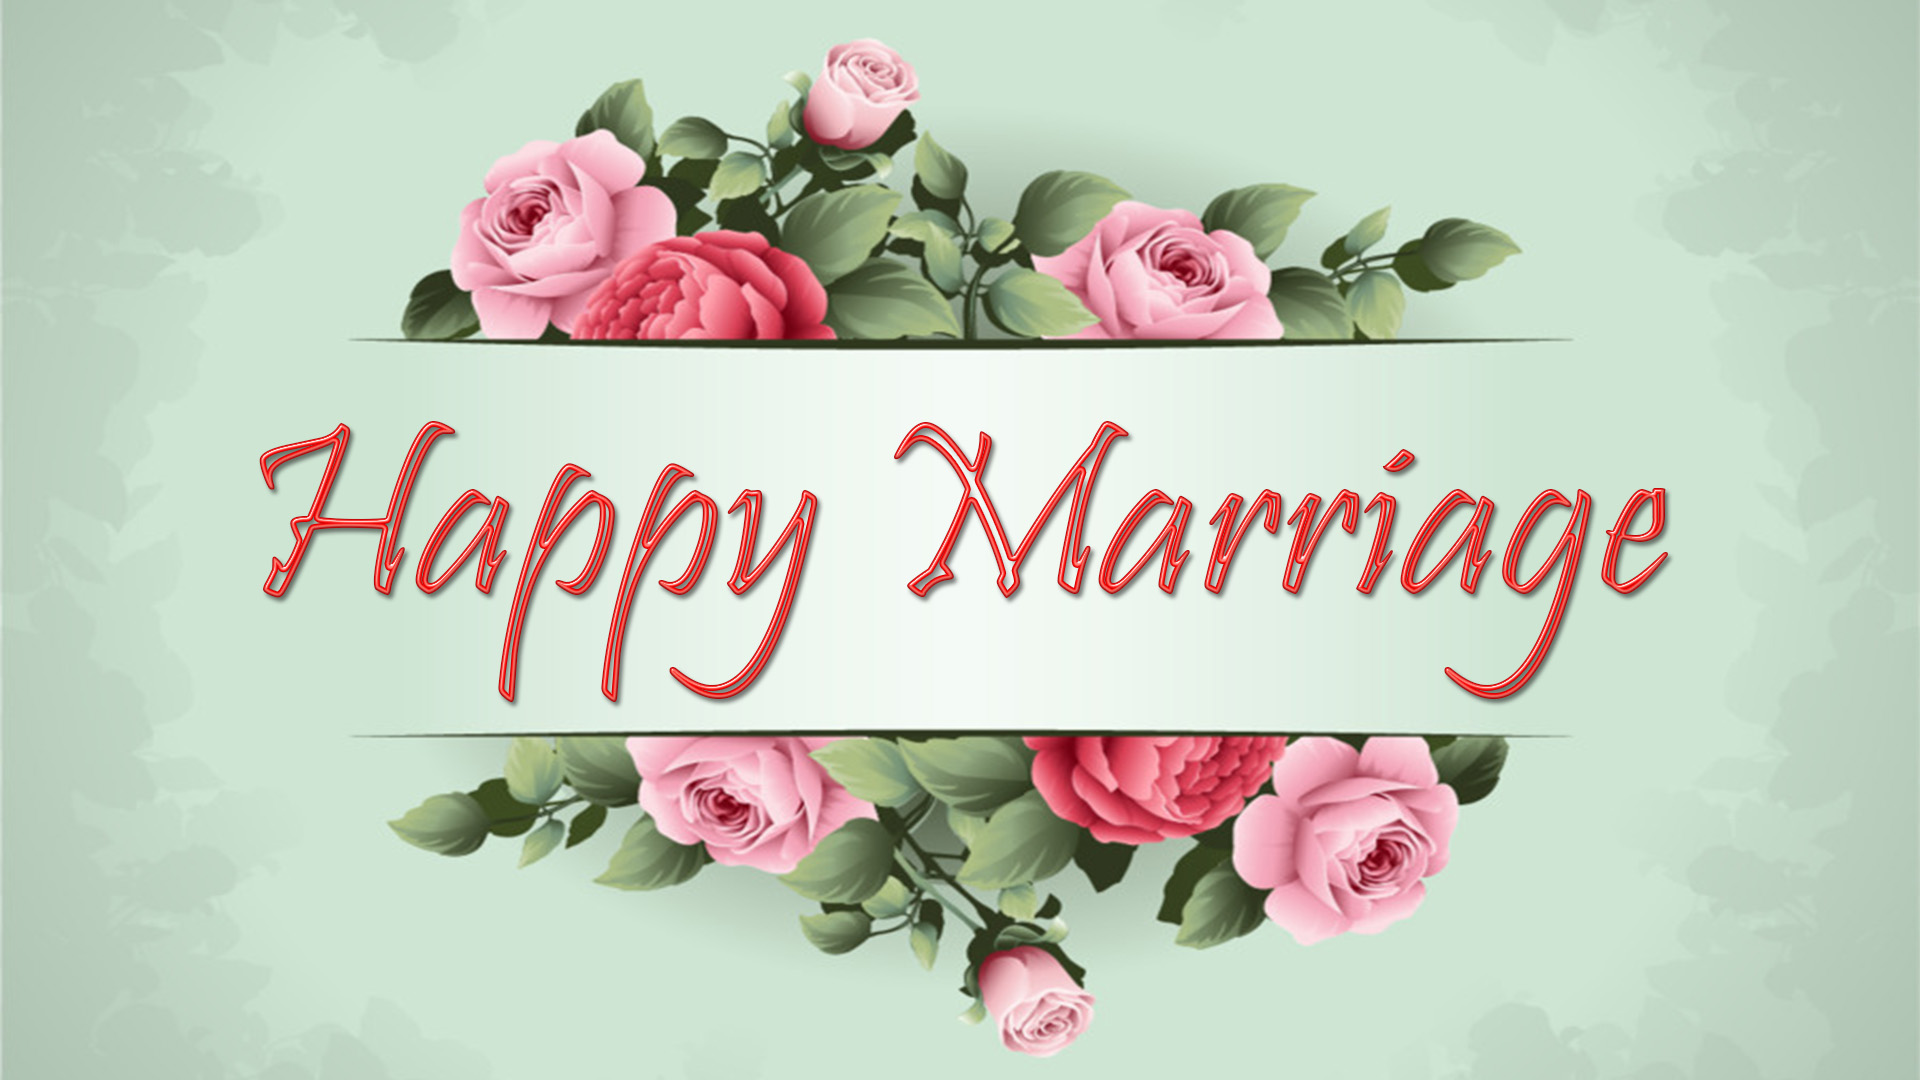 Happy Marriage Images Pictures Hd Wallpapers 2018